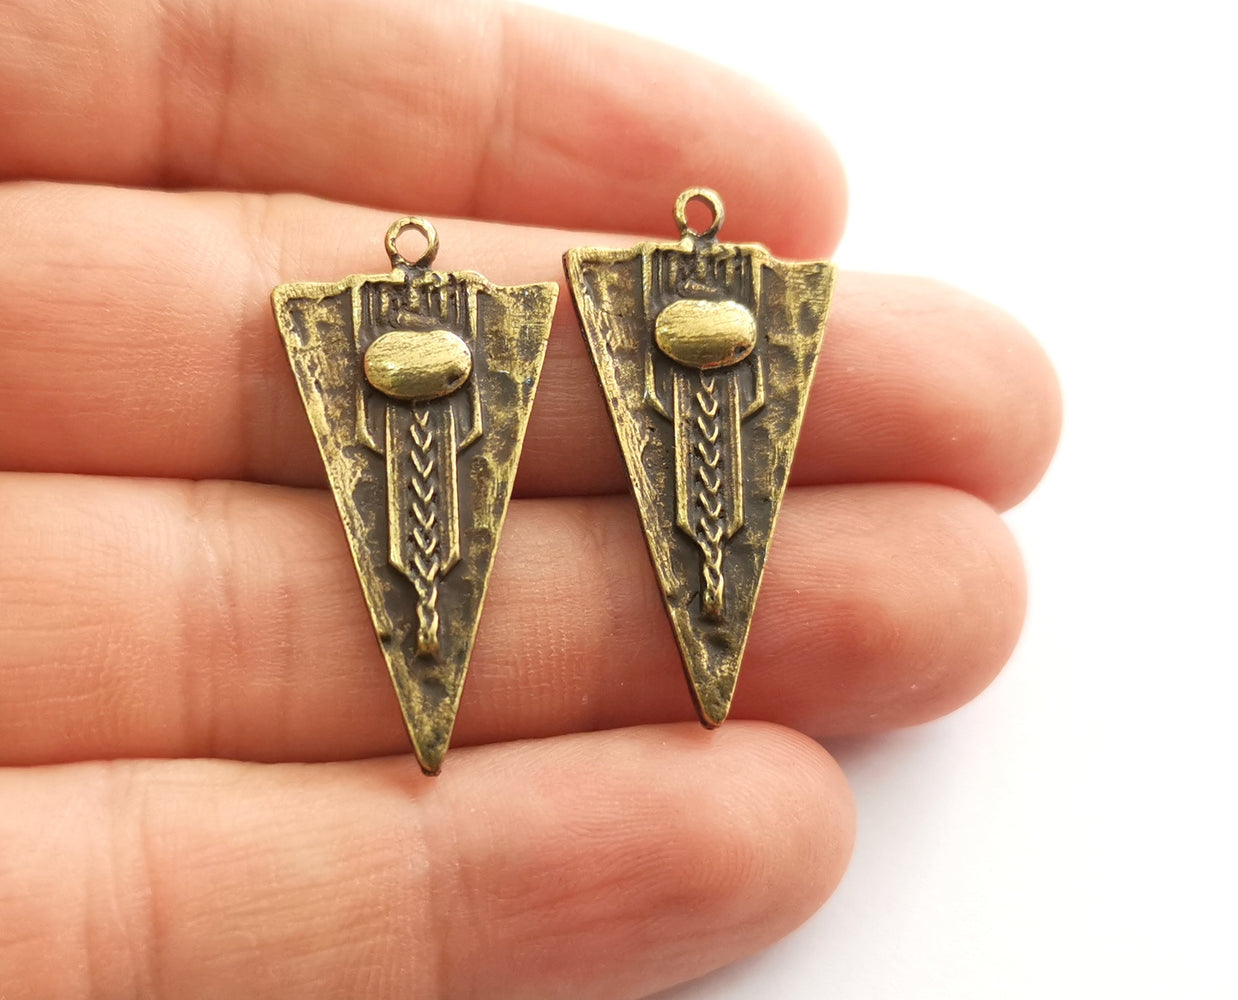 2 Antique Bronze Charms Antique Bronze Plated Charms (Both Side Same) (35x18mm)  G18625